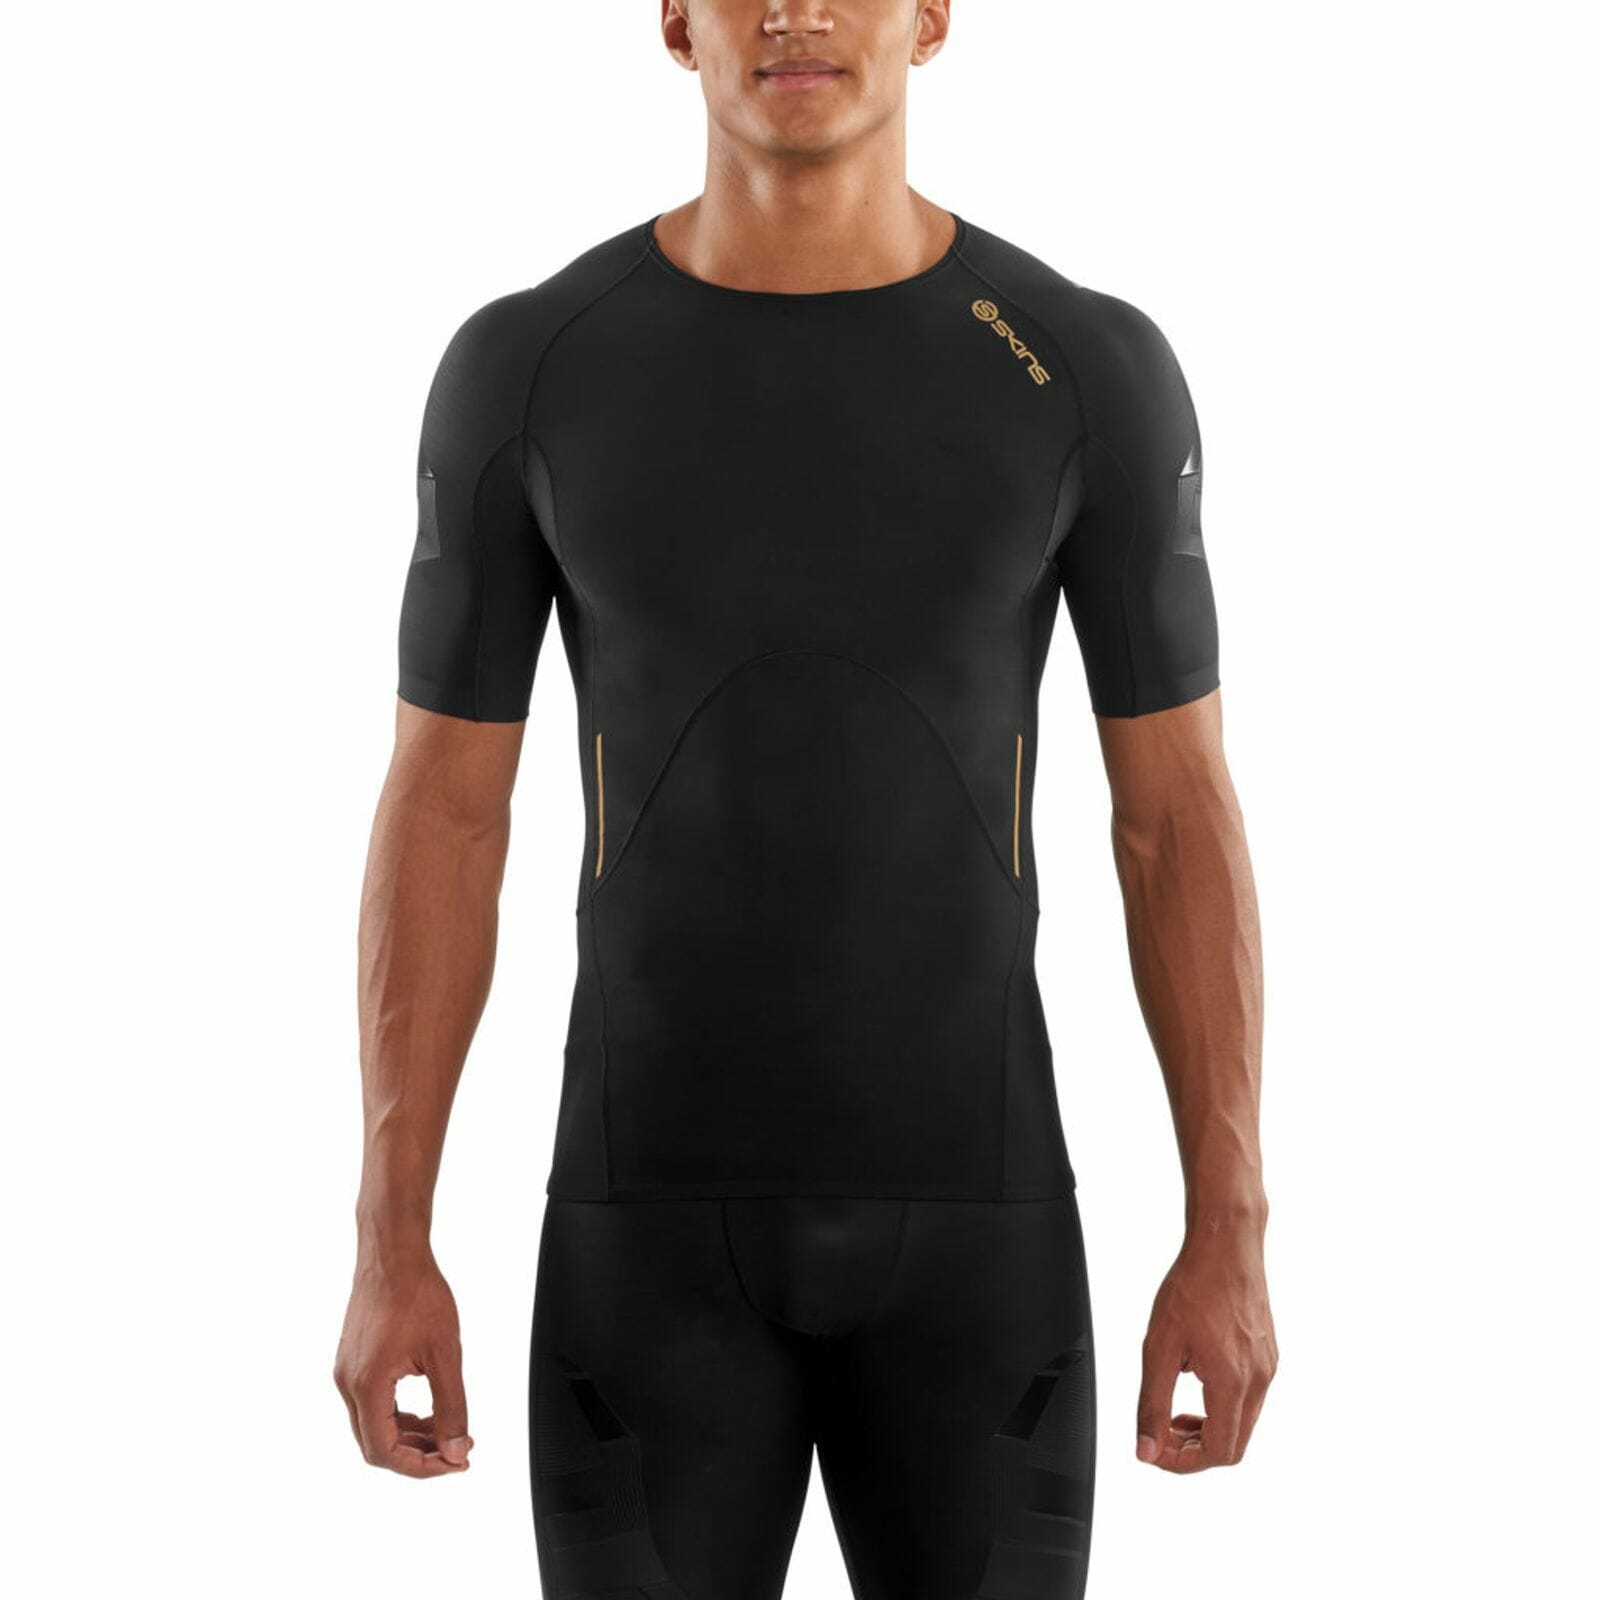 BNIB Skins A400 MEN'S COMPRESSION SHORT SLEEVE TOP - clothing & accessories  - by owner - craigslist